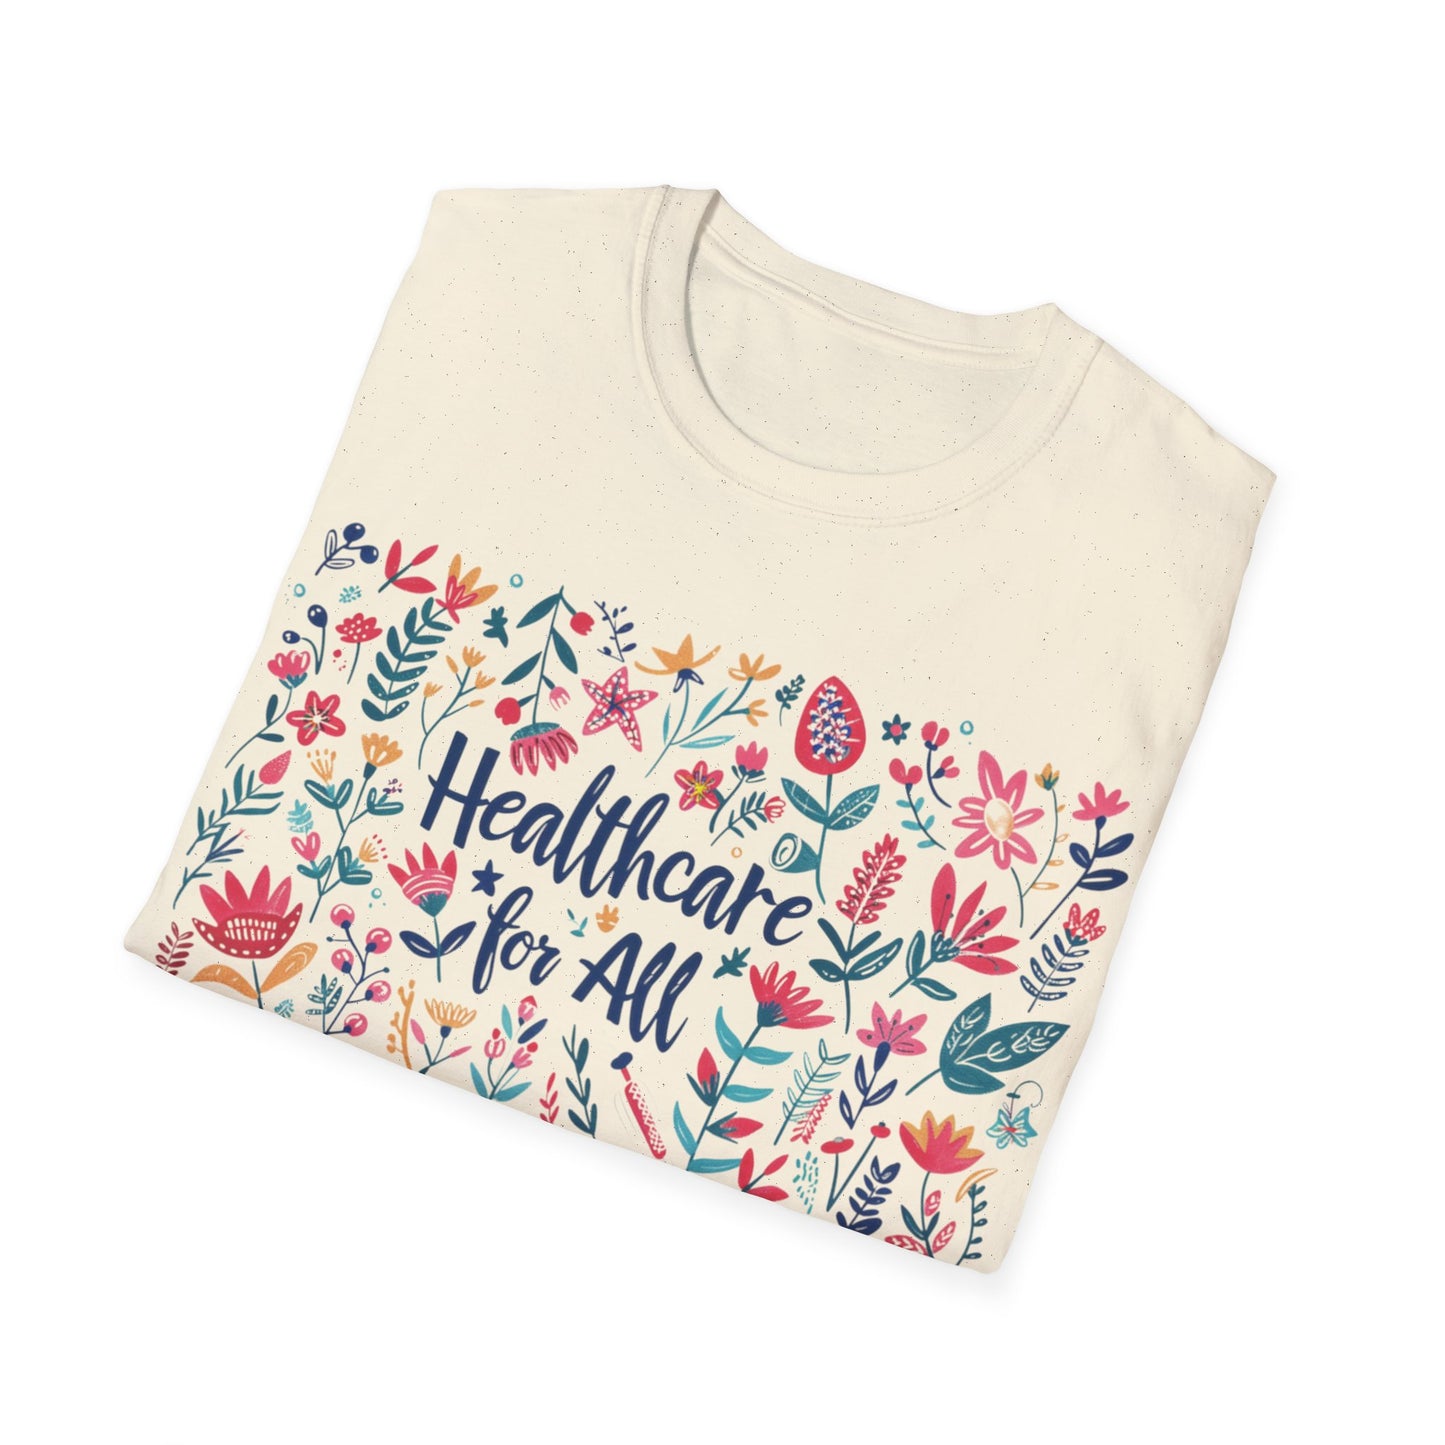 Political Shirt Healthcare for All t-shirt Protest Activism Statement tshirt Demand Quality Healthcare! Inspired by Cath Kidston Style